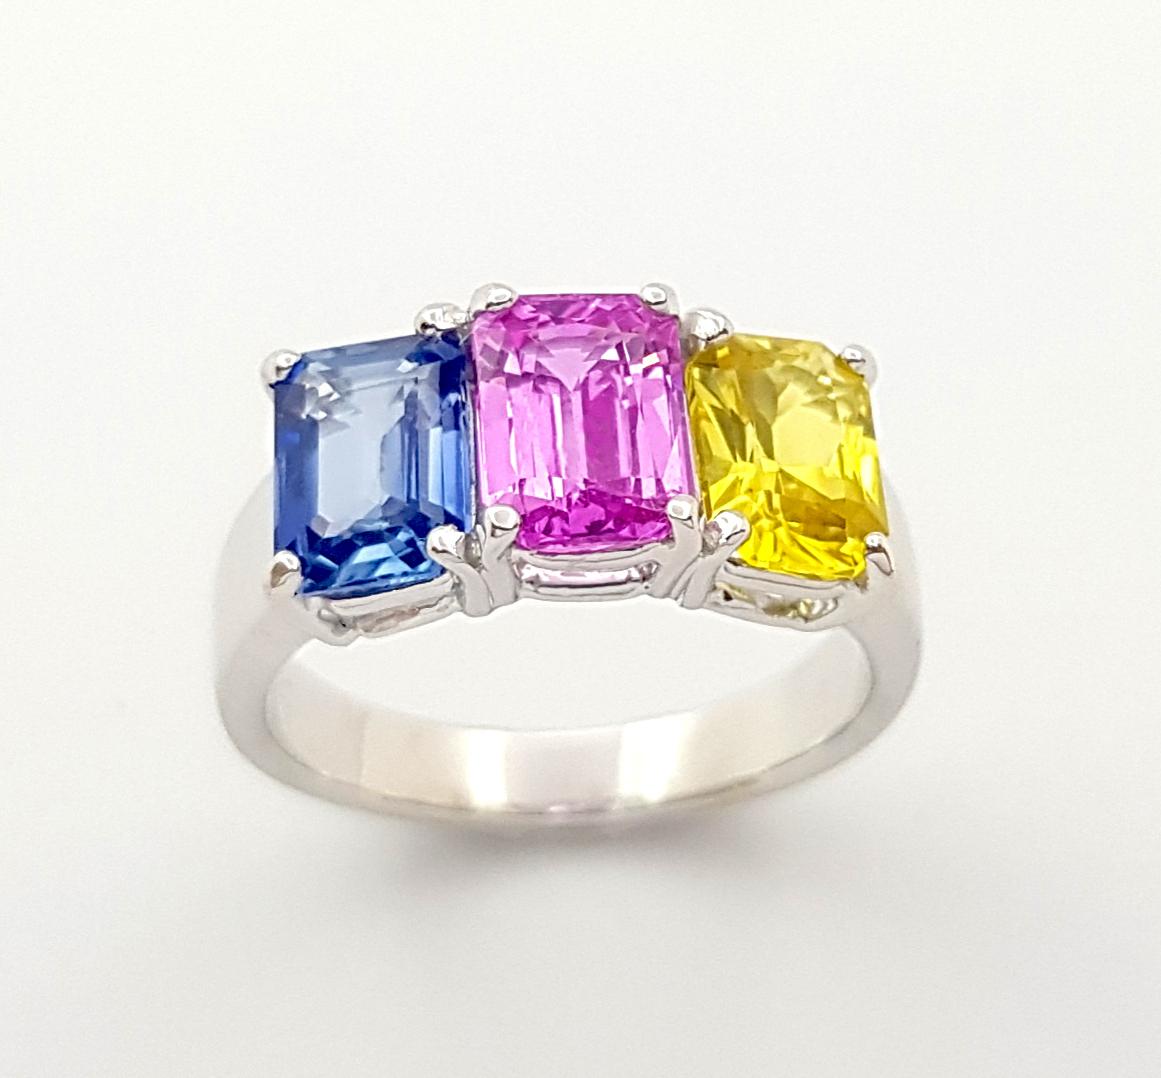 Blue Sapphire, Pink Sapphire and Yellow Sapphire Ring set in Platinum 900 For Sale 3